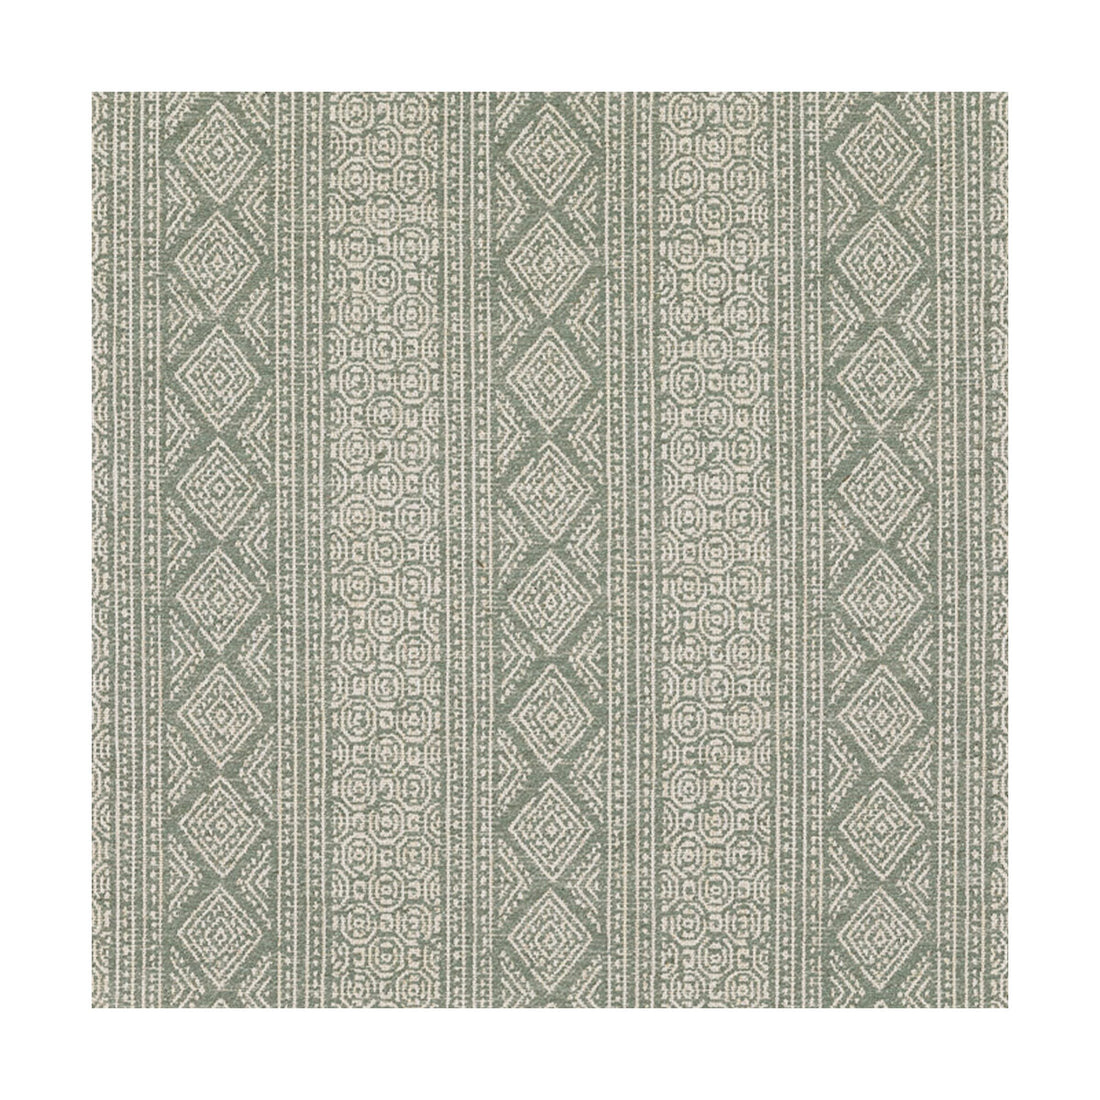 Jasper fabric in sage color - pattern BFC-3701.23.0 - by Lee Jofa in the Blithfield collection